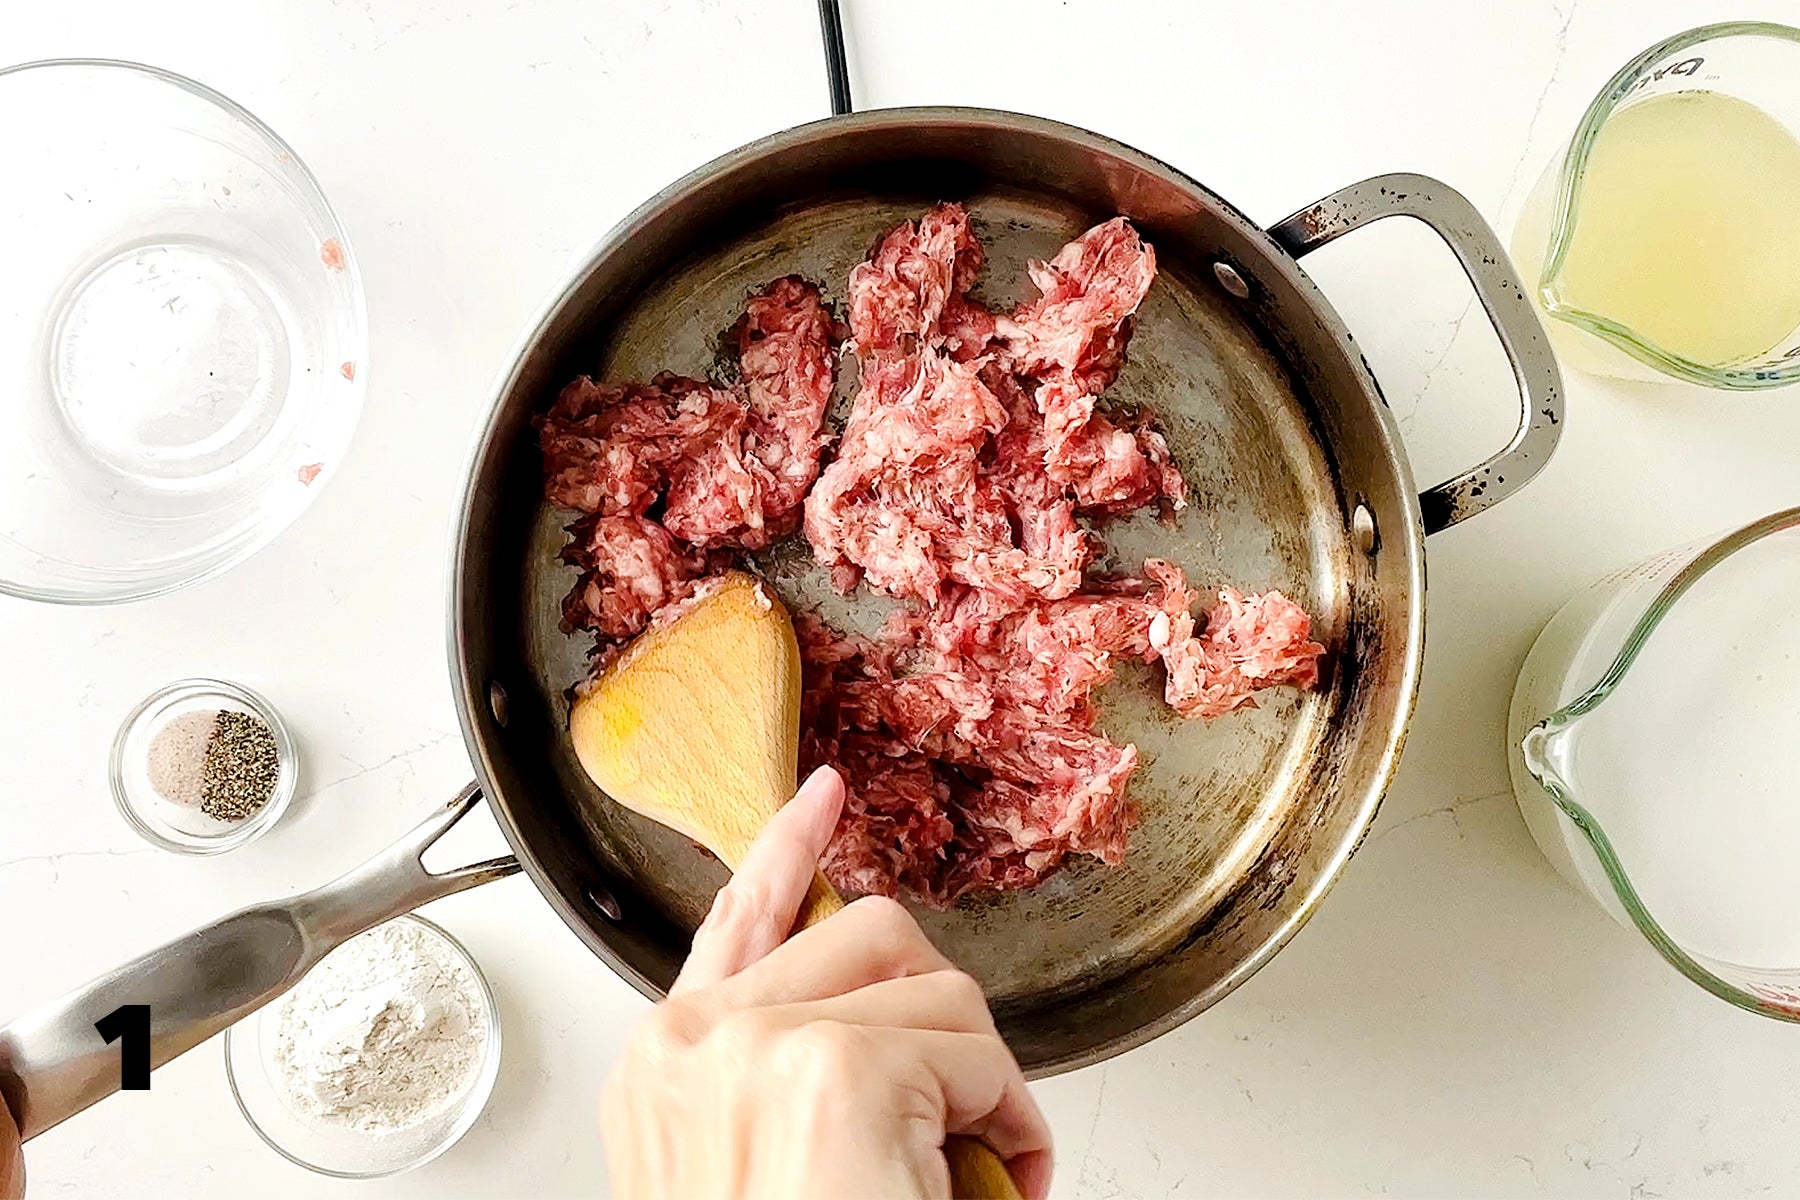 breaking up ground pork with wooden spoon in pan